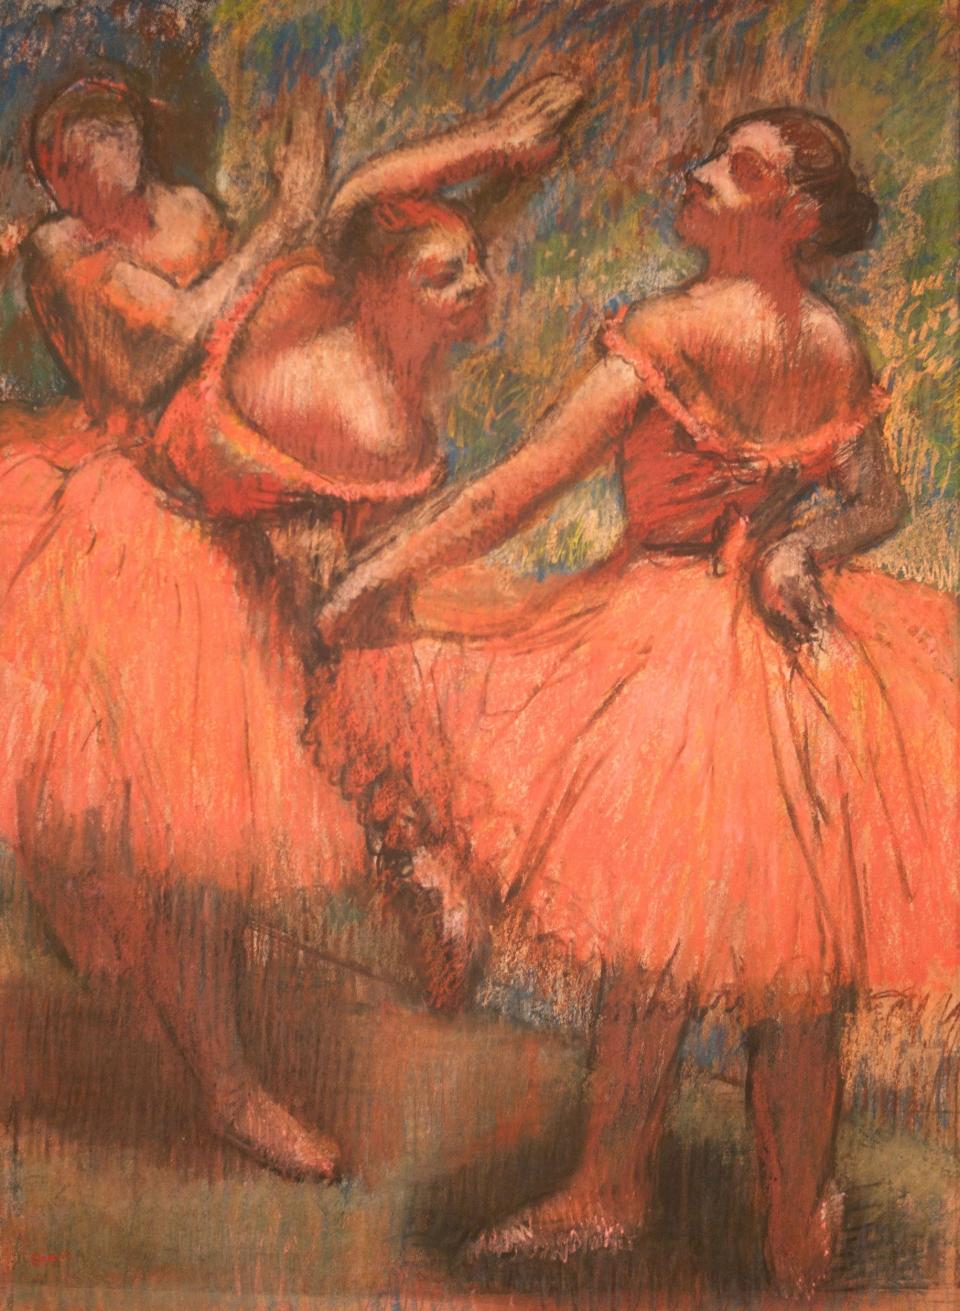 'No species of performer is so self-critical as a dancer': The Red Ballet Skirts (c 1895-1900) at the Burrell